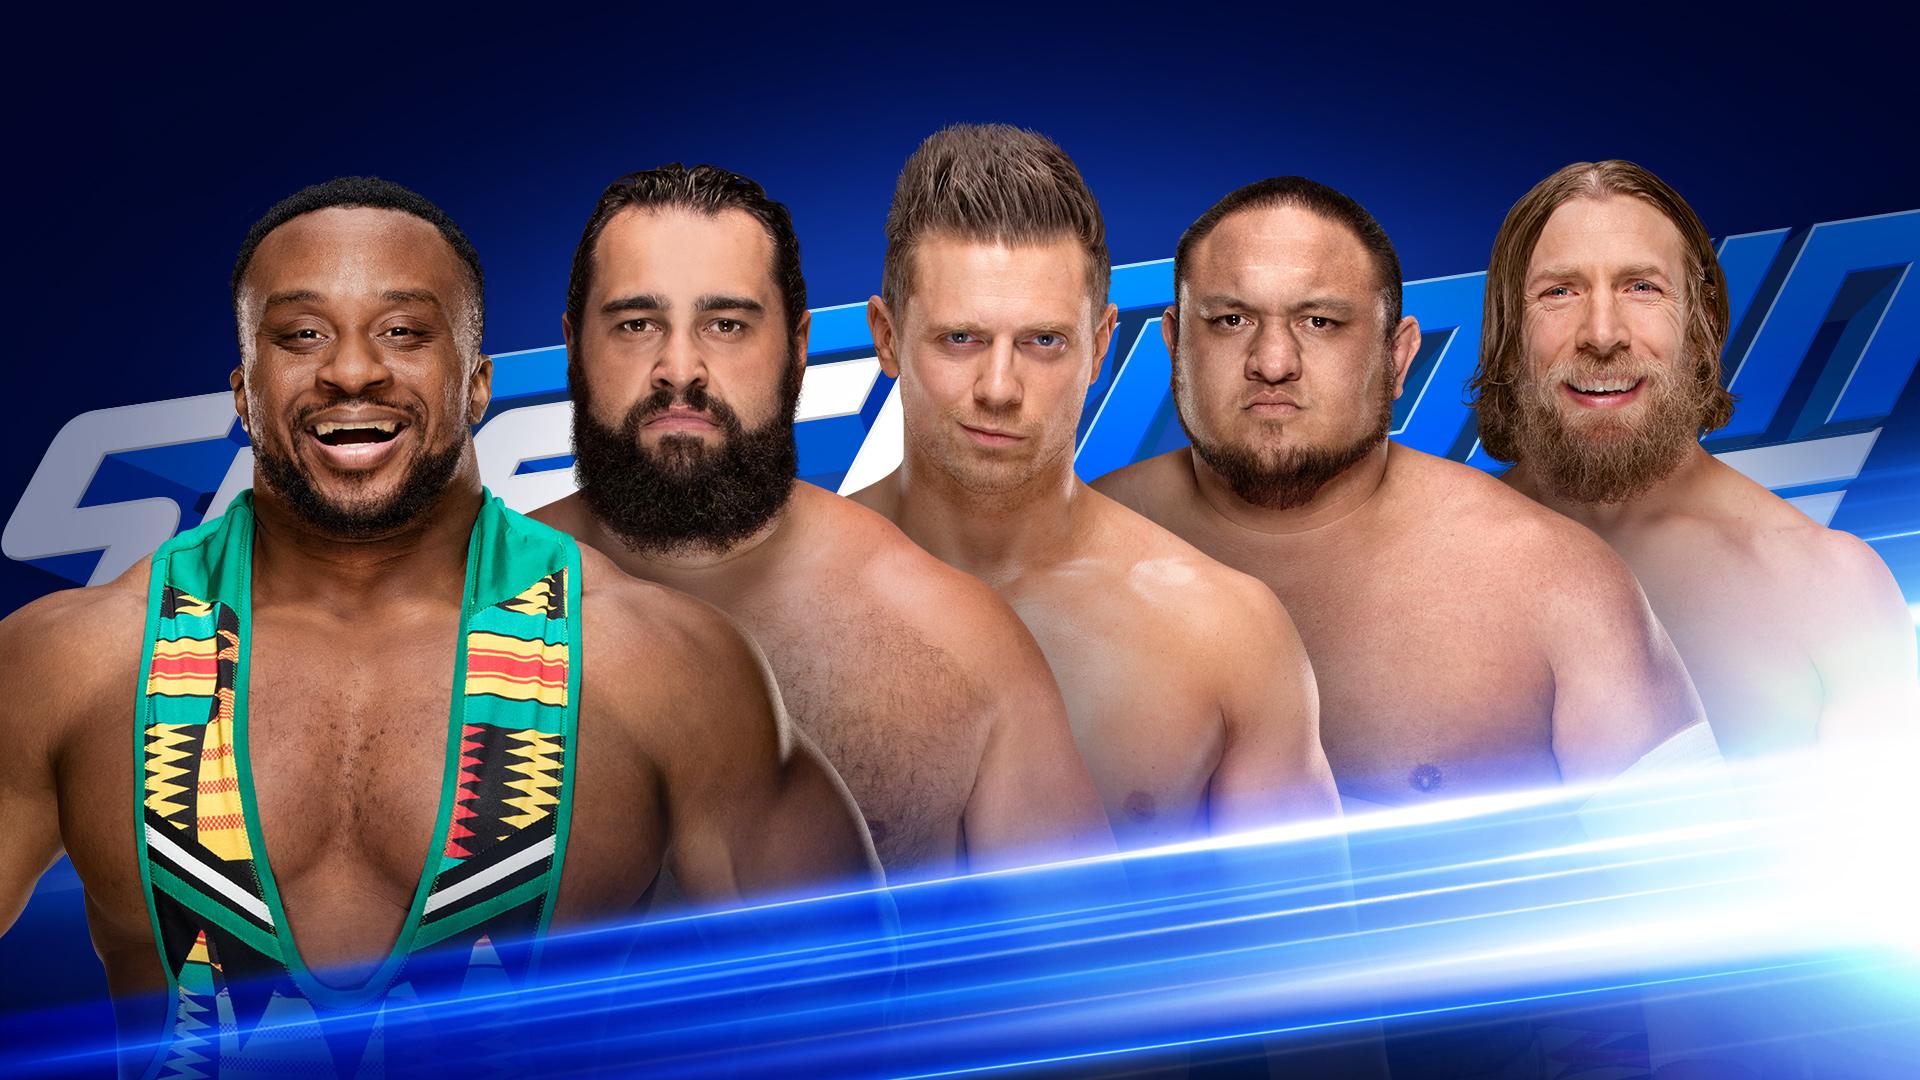 What You Can Expect To See From Tonight's Episode Of SmackDown LIVE